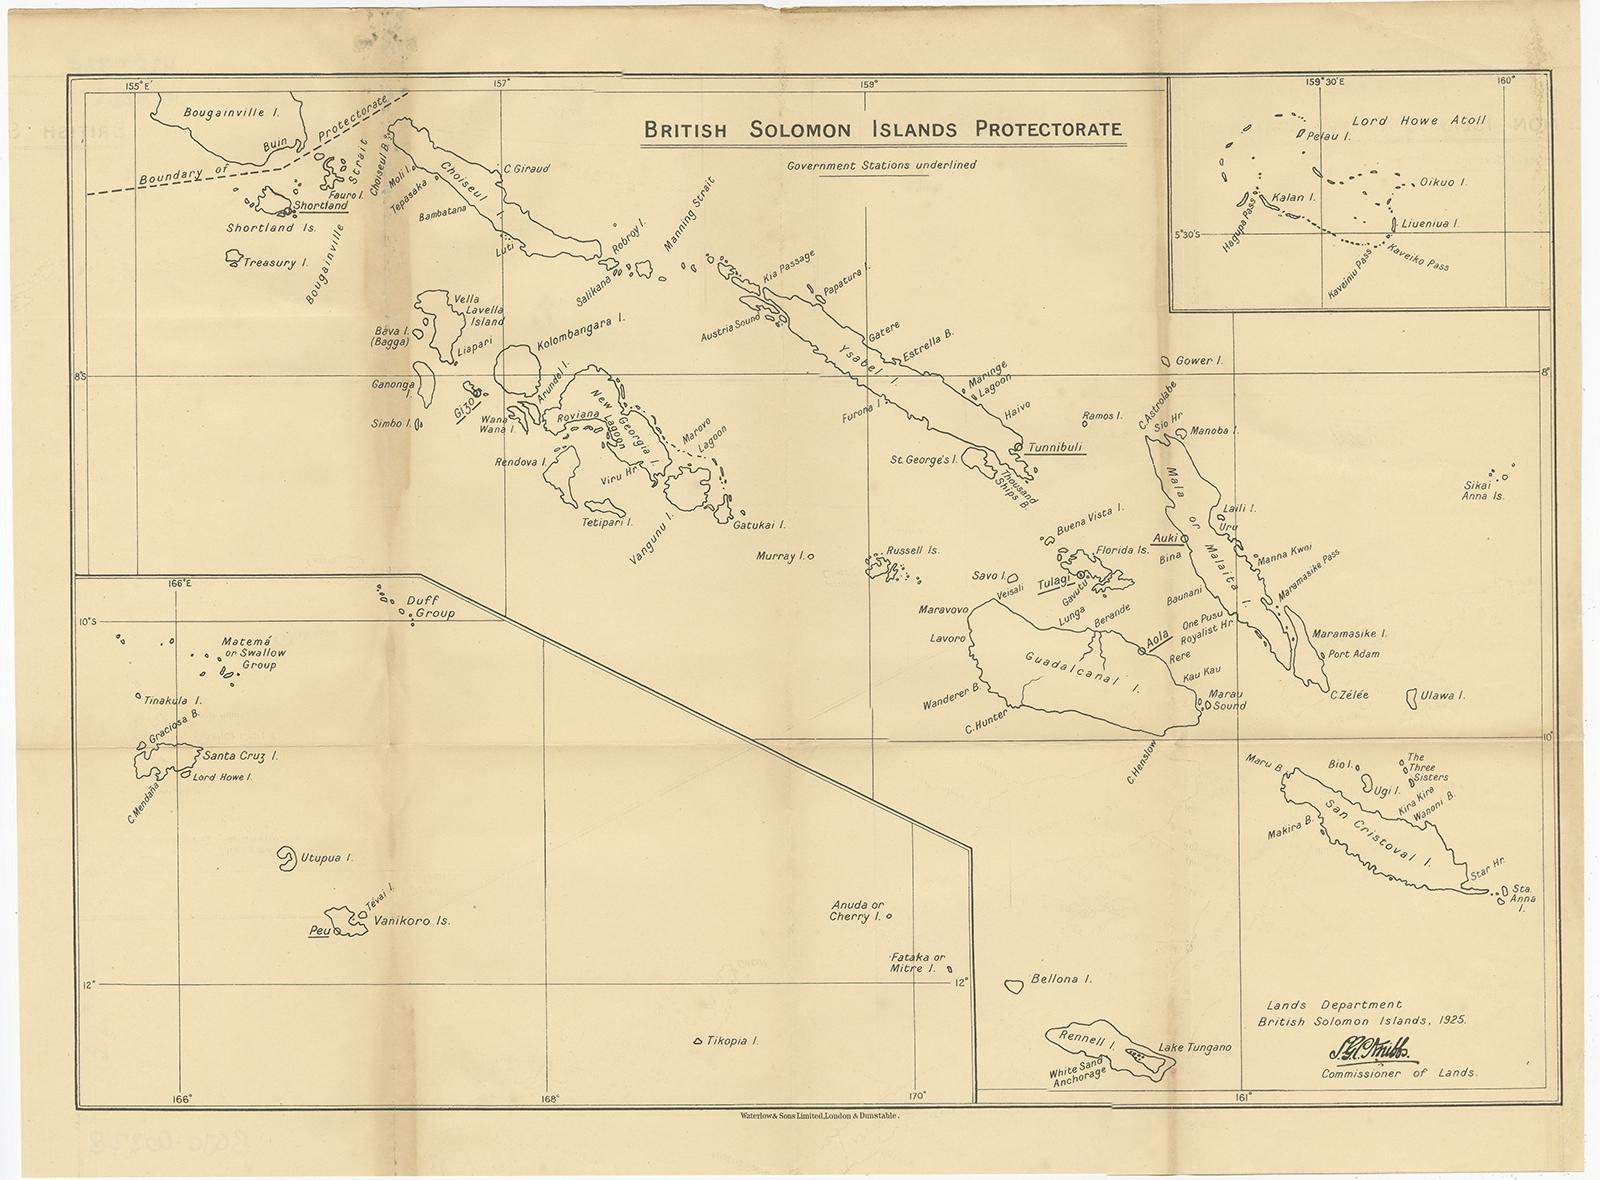 Antique map titled 'British Solomon Islands Protectorate'. 

Old map of the British Solomon Islands Protectorate.

Artists and Engravers: Published by Waterlow & Sons, London & Dunstable.

Condition: Good, general age-related toning. Folding